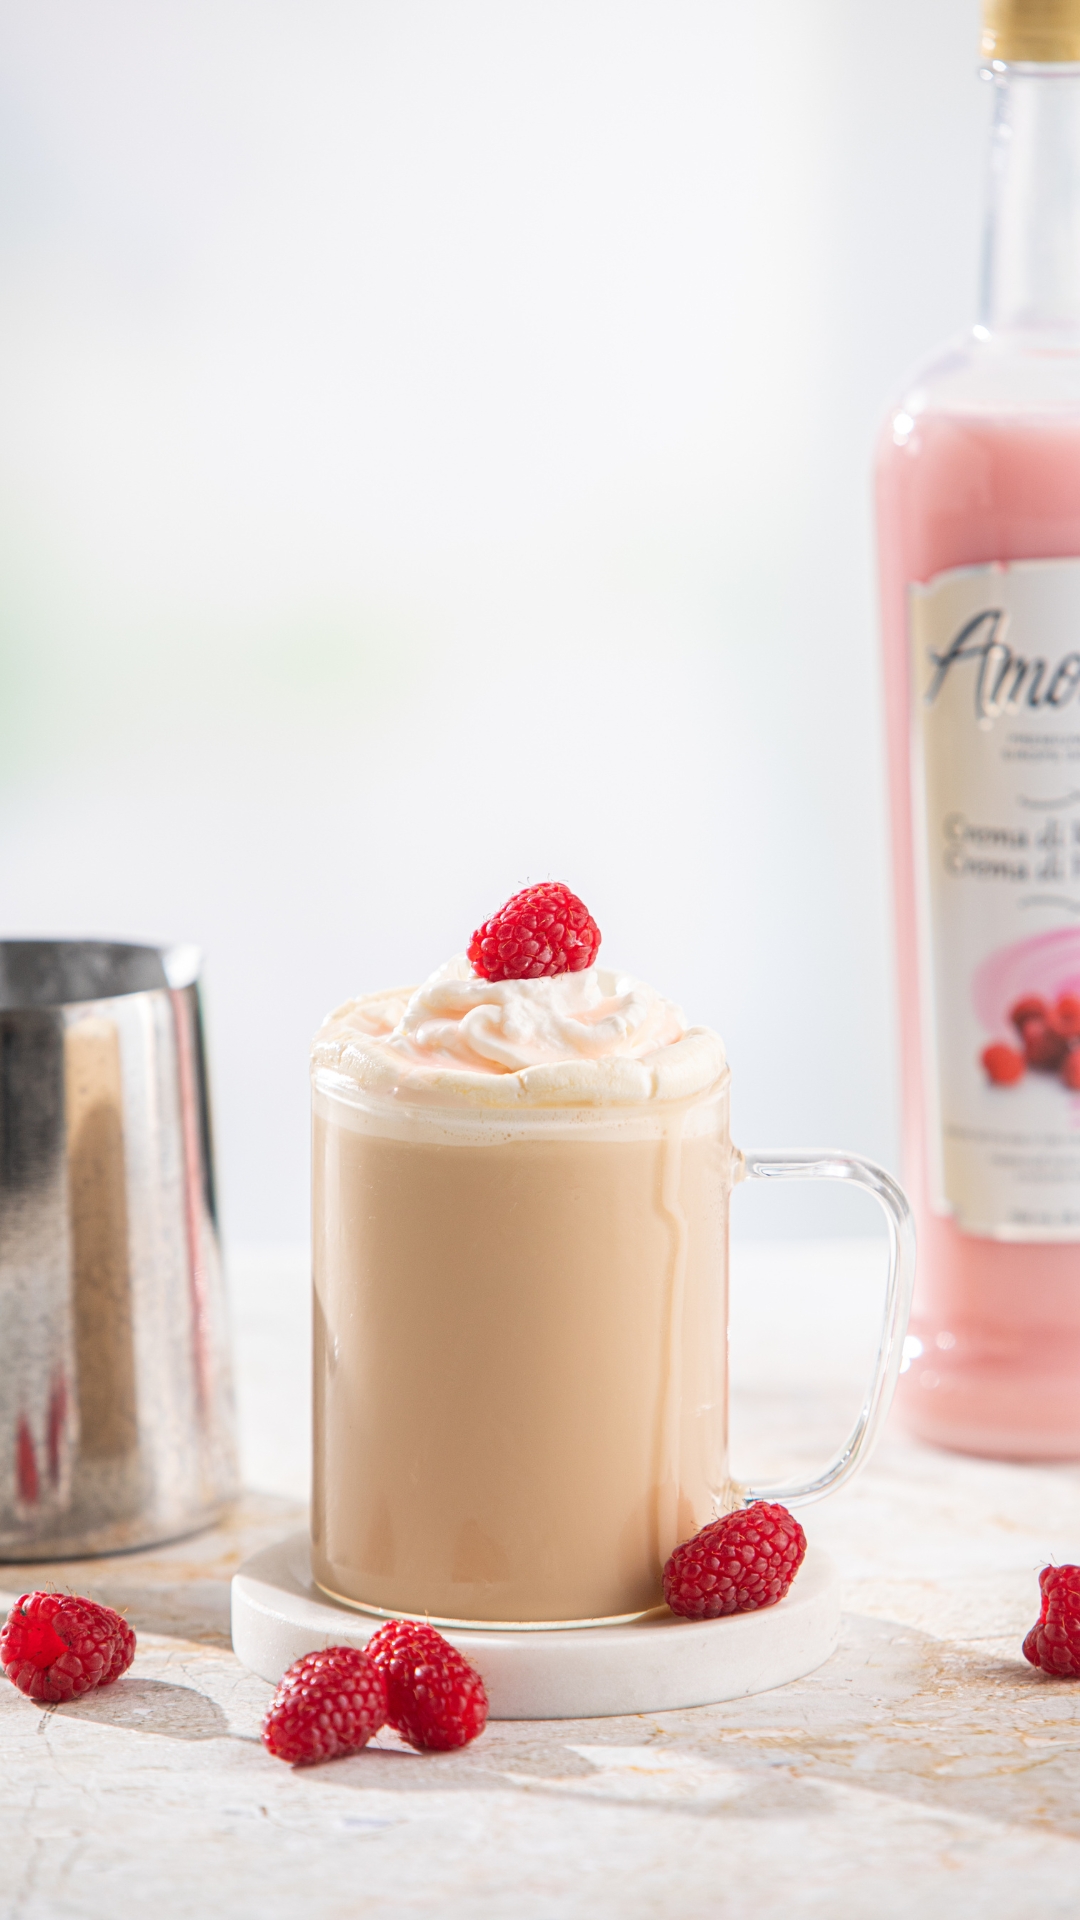 Raspberries and Cream Latte on a counter in front of Amoretti Crema di Raspberry Syrup surrounded by fresh raspberries